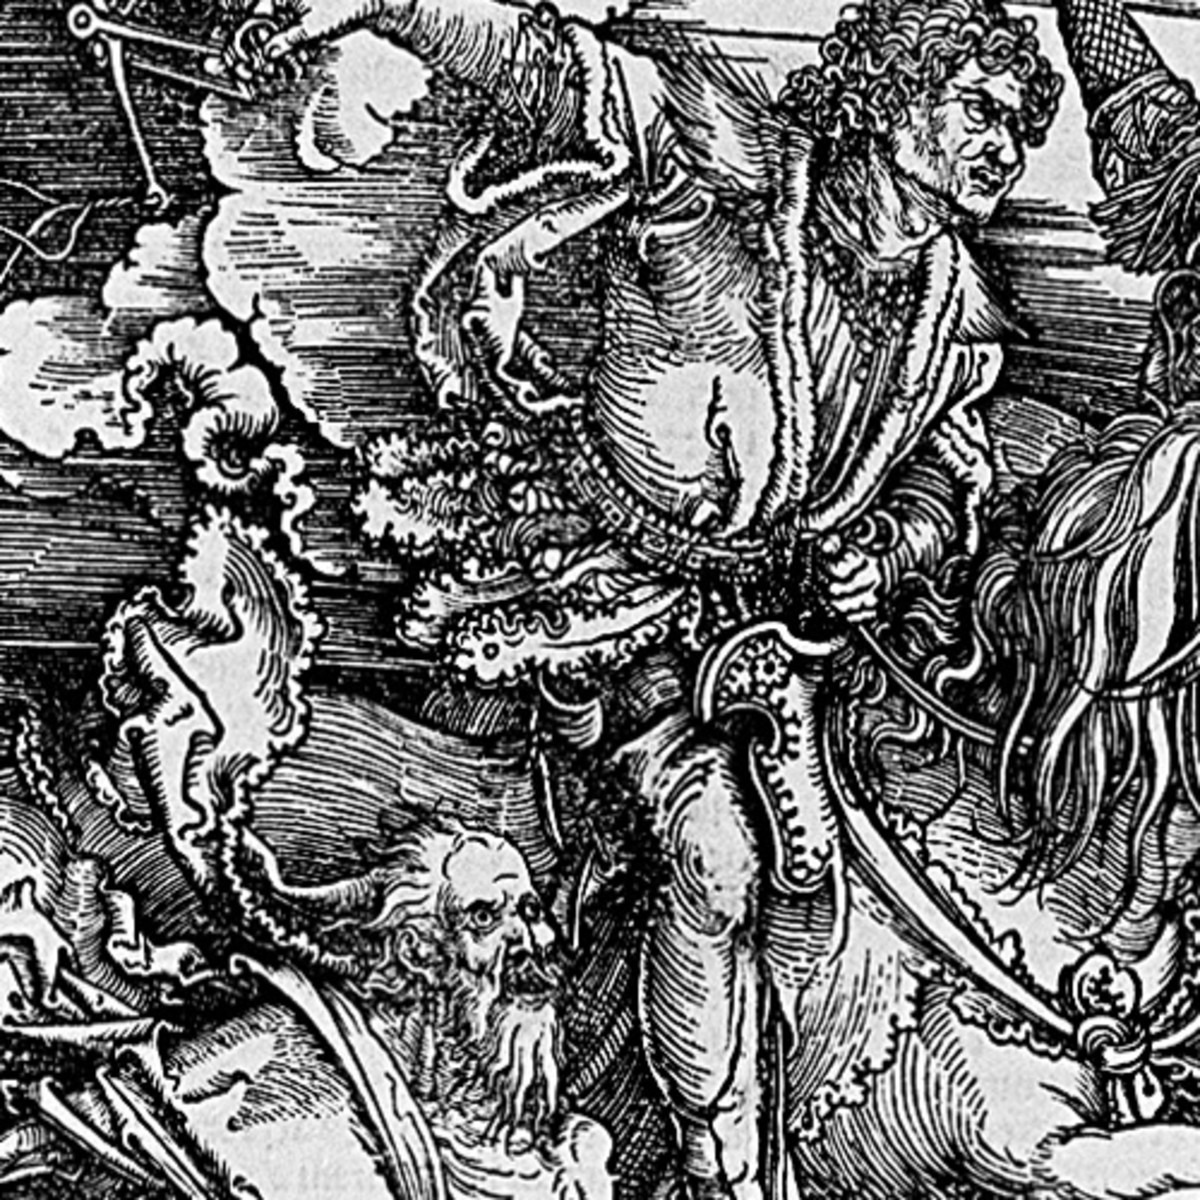 Here we show a portion of 'The Four Riders of the Apocalypse' - the fourth Woodcut from the suite by Albrecht Durer known as "The Apocalypse".